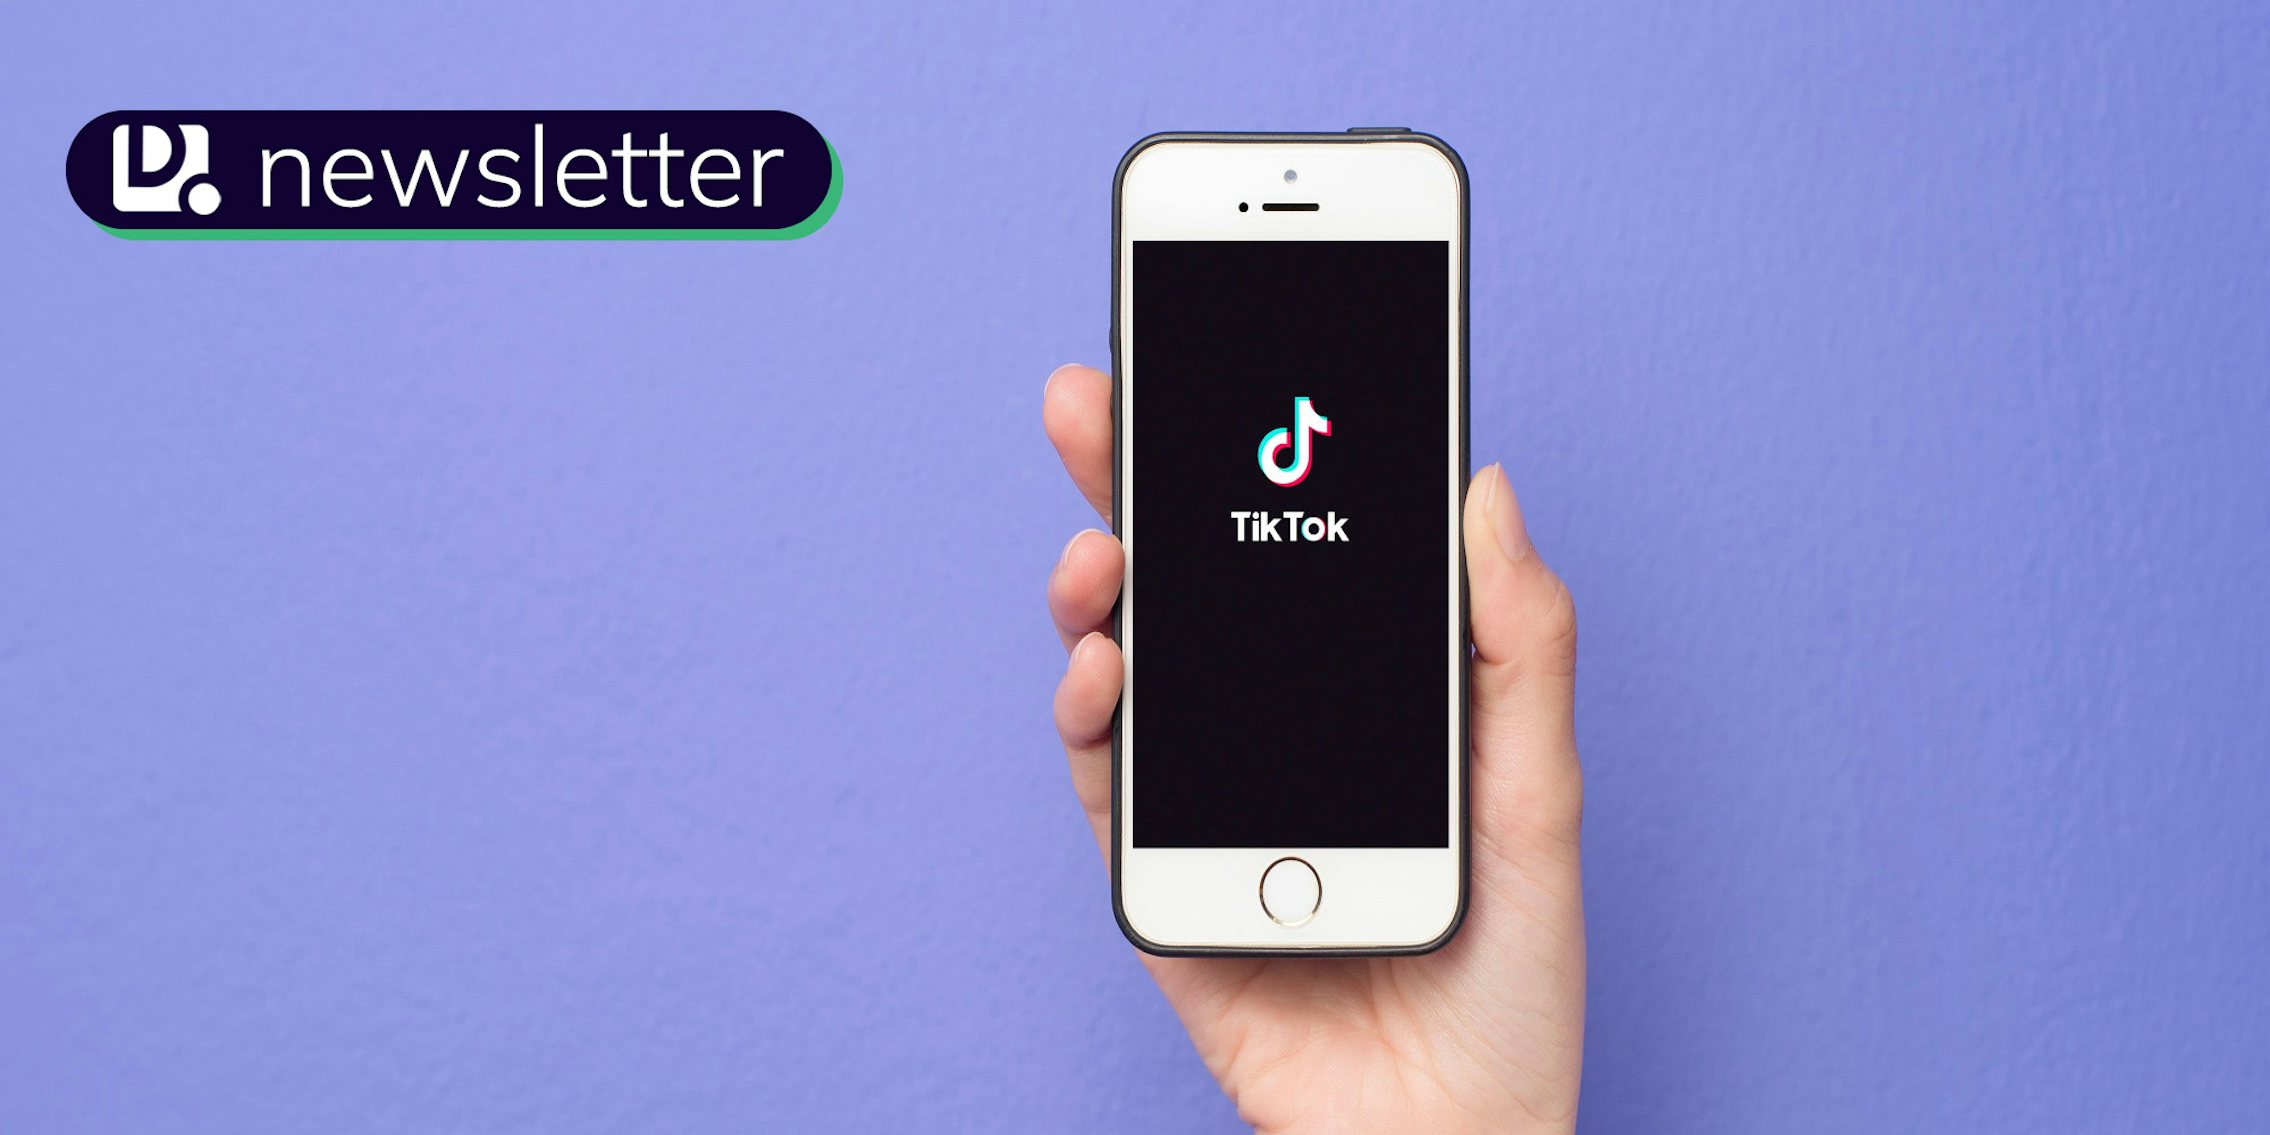 A hand holding a smartphone with the TikTok logo on it. In the top left corner is the Daily Dot newsletter logo.